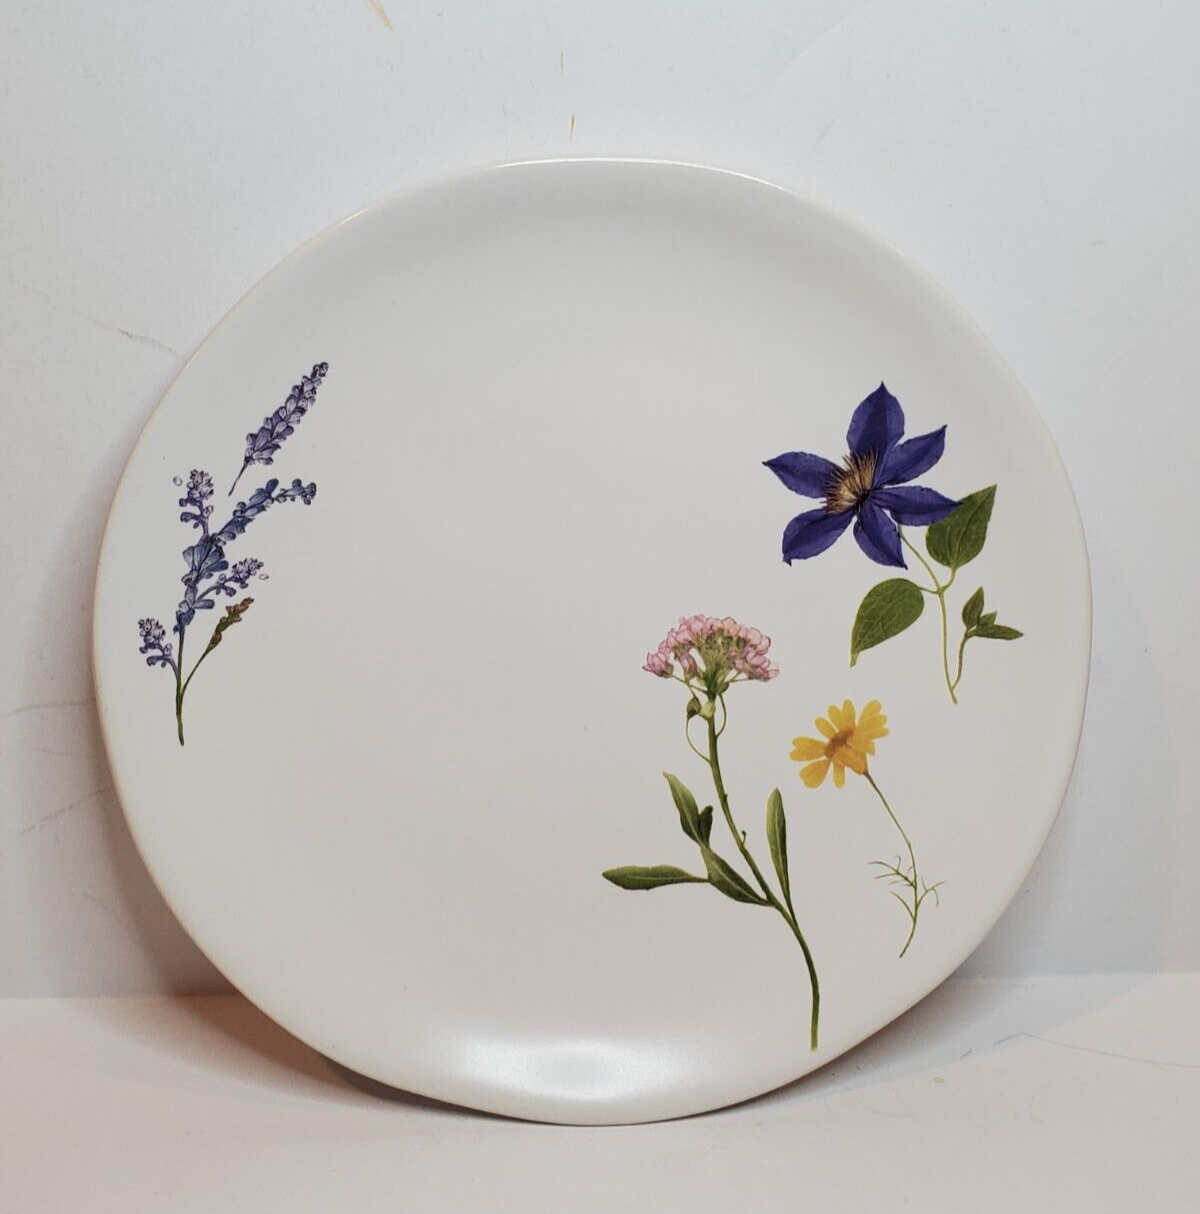 Primary image for Bee & Willow Charlotte Floral Wildflower Appetizer Salad Plate 7.5" Multicolor 